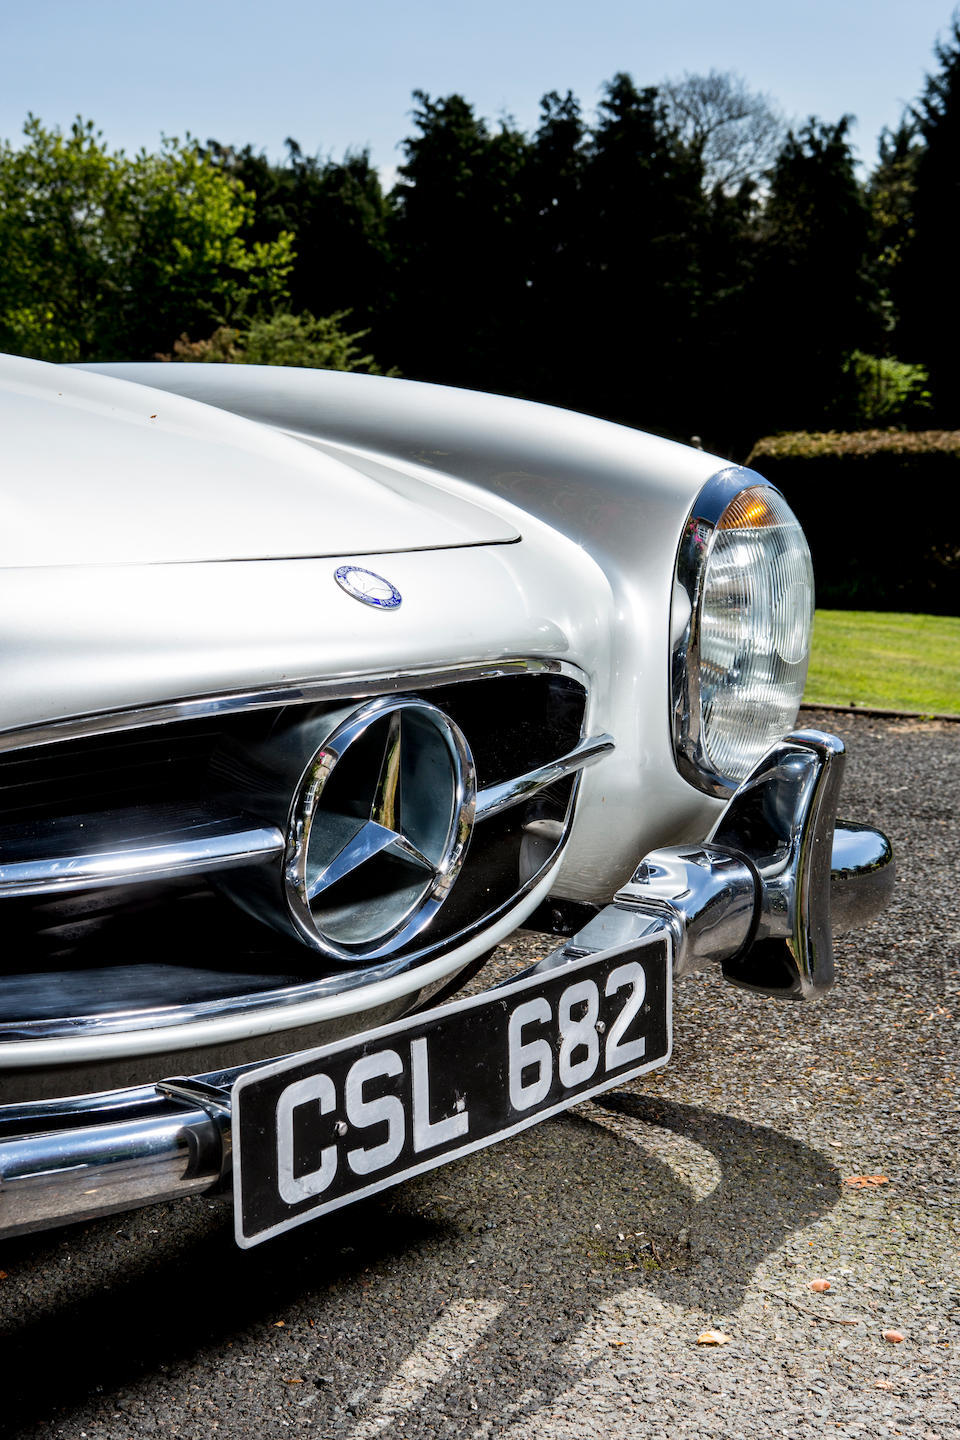 <b>1957 Mercedes-Benz 300SL Roadster</b><br />Chassis no. 198.042.7500299<br />Engine no. 198.9823/0000107